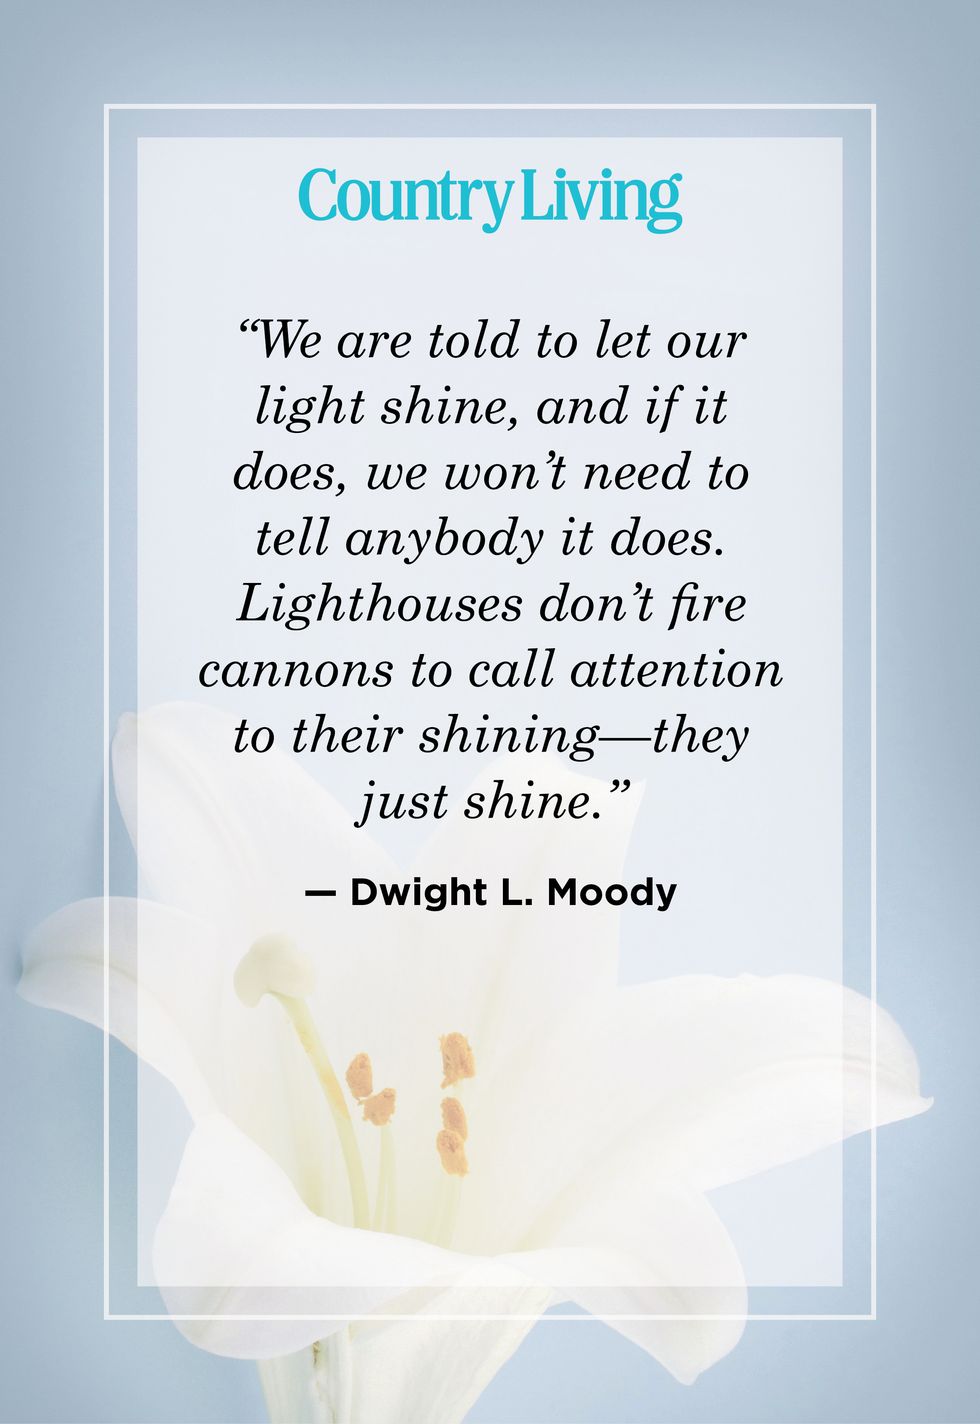 easter quote by dwight l moody with photo of easter lily